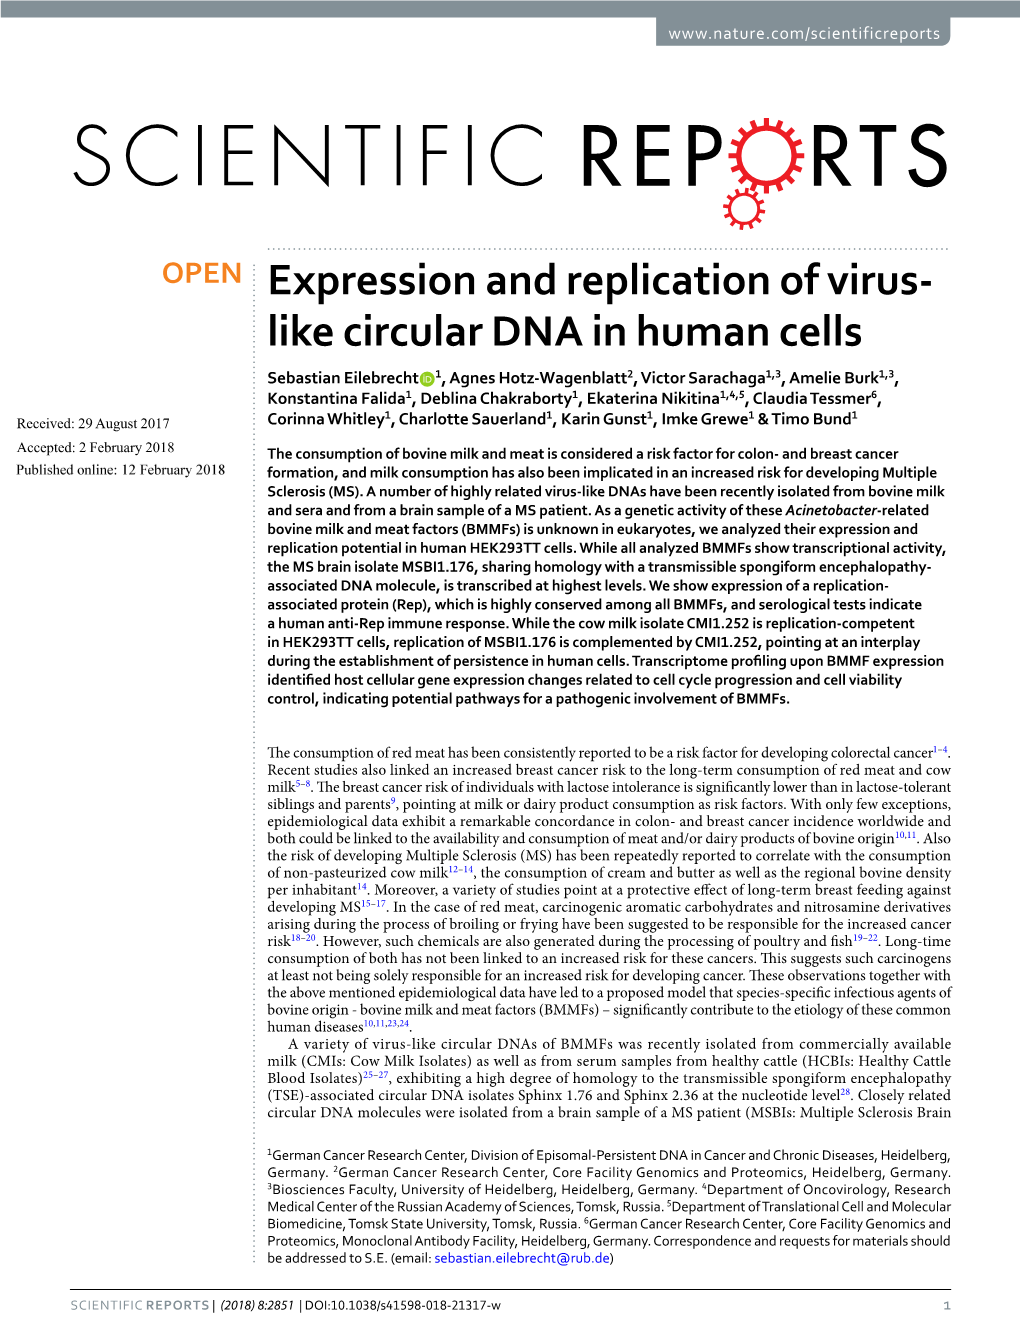 Expression and Replication of Virus-Like Circular DNA in Human Cells